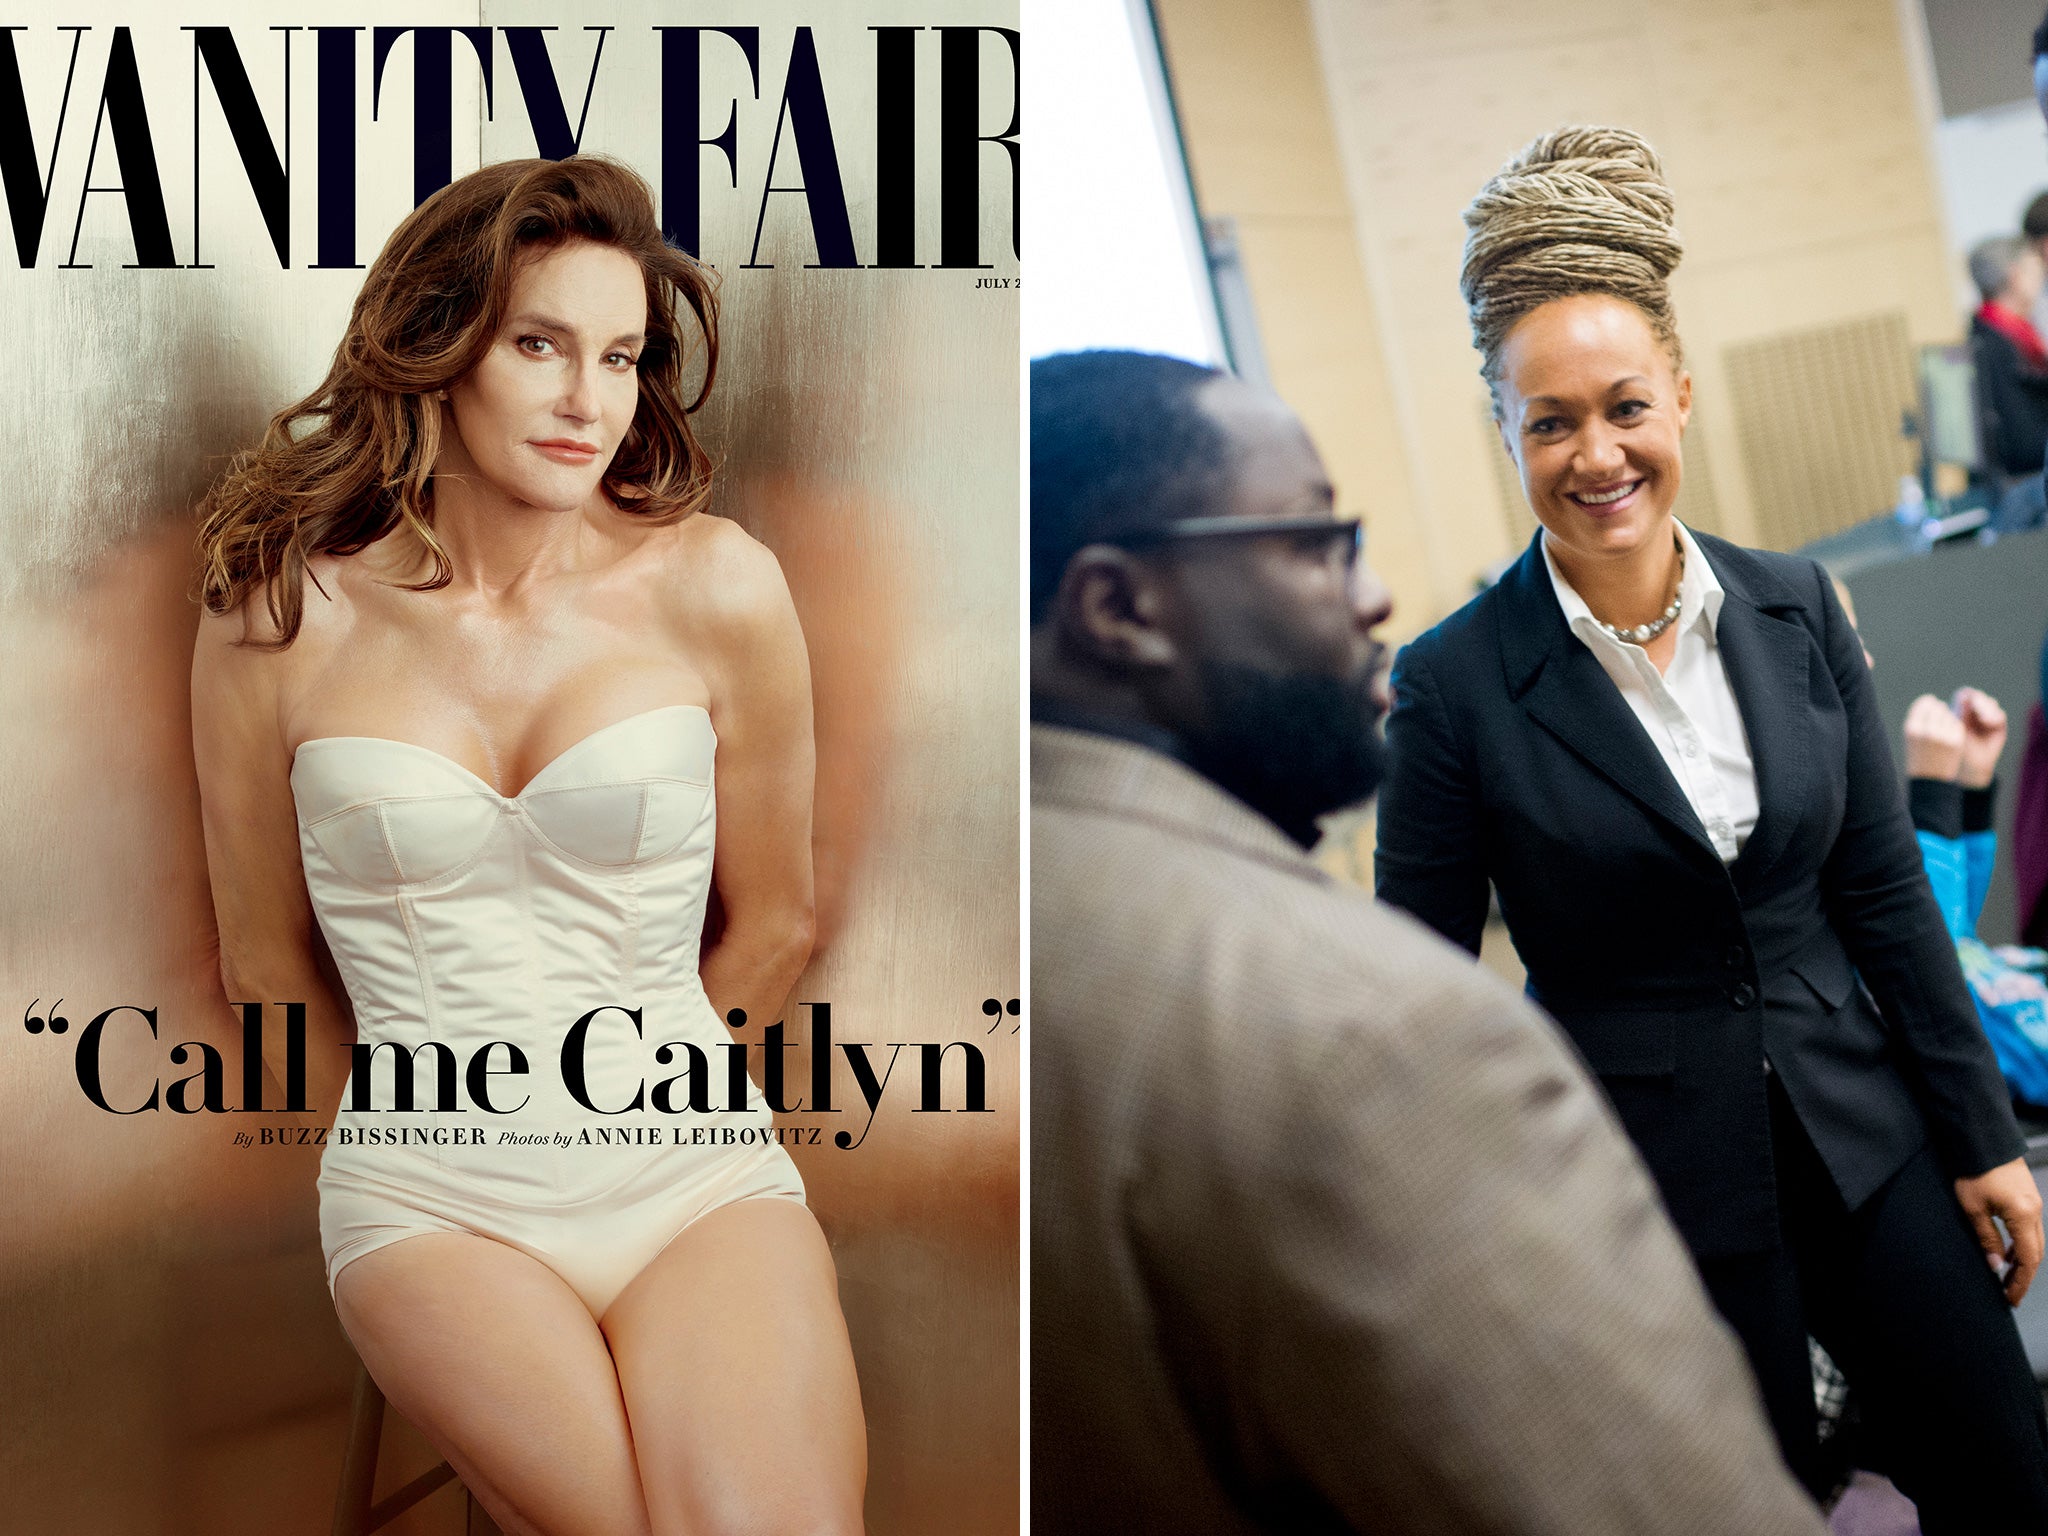 The cases of Jenner and Dolezal have been intertwined in the media